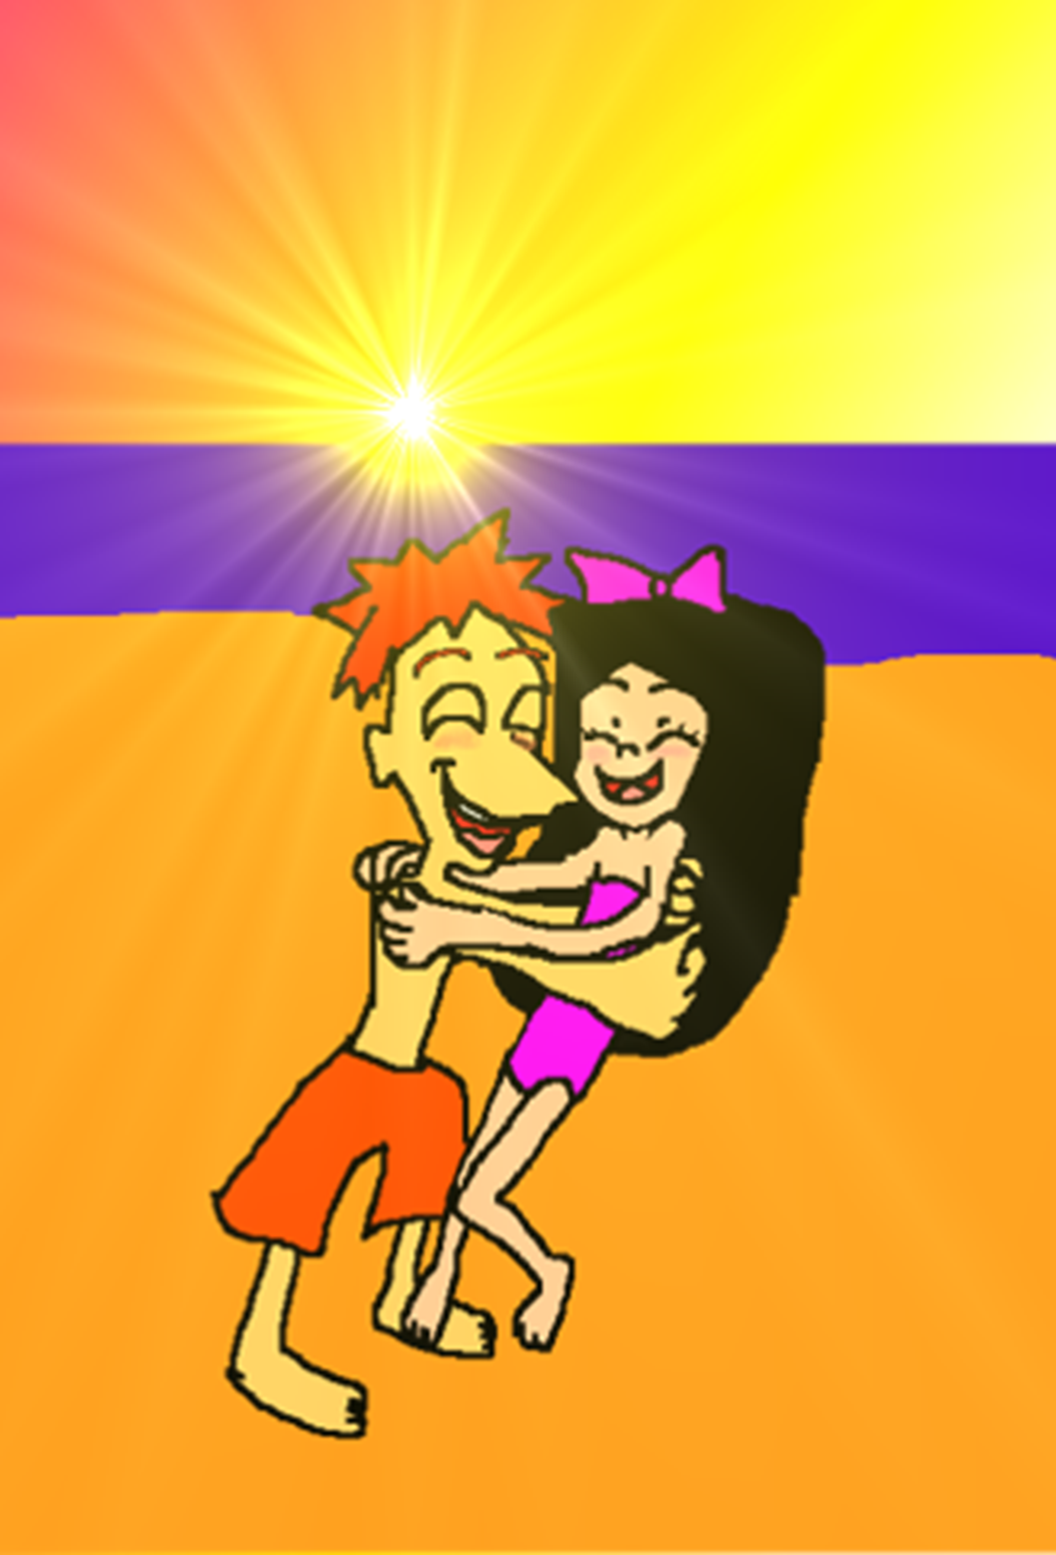 Phineas and Isabella Summer Love.